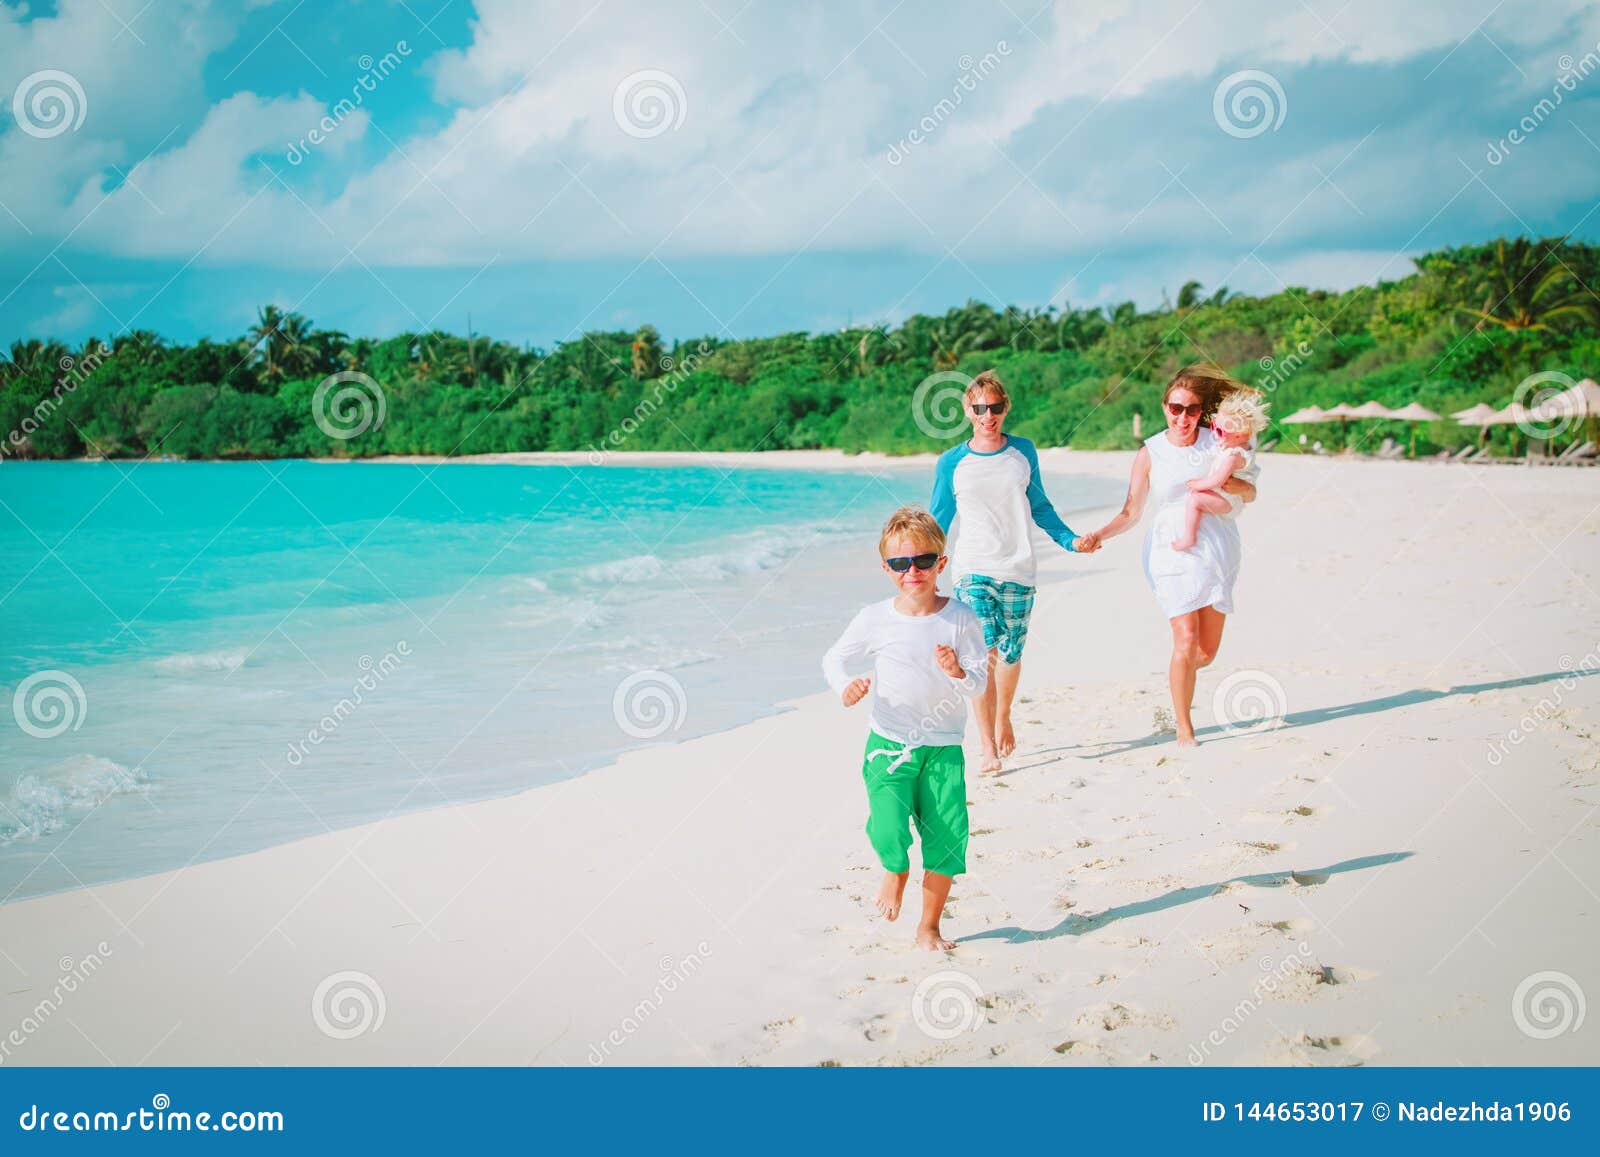 Happy Family With Kids Play On Beach Vacation Stock Image 